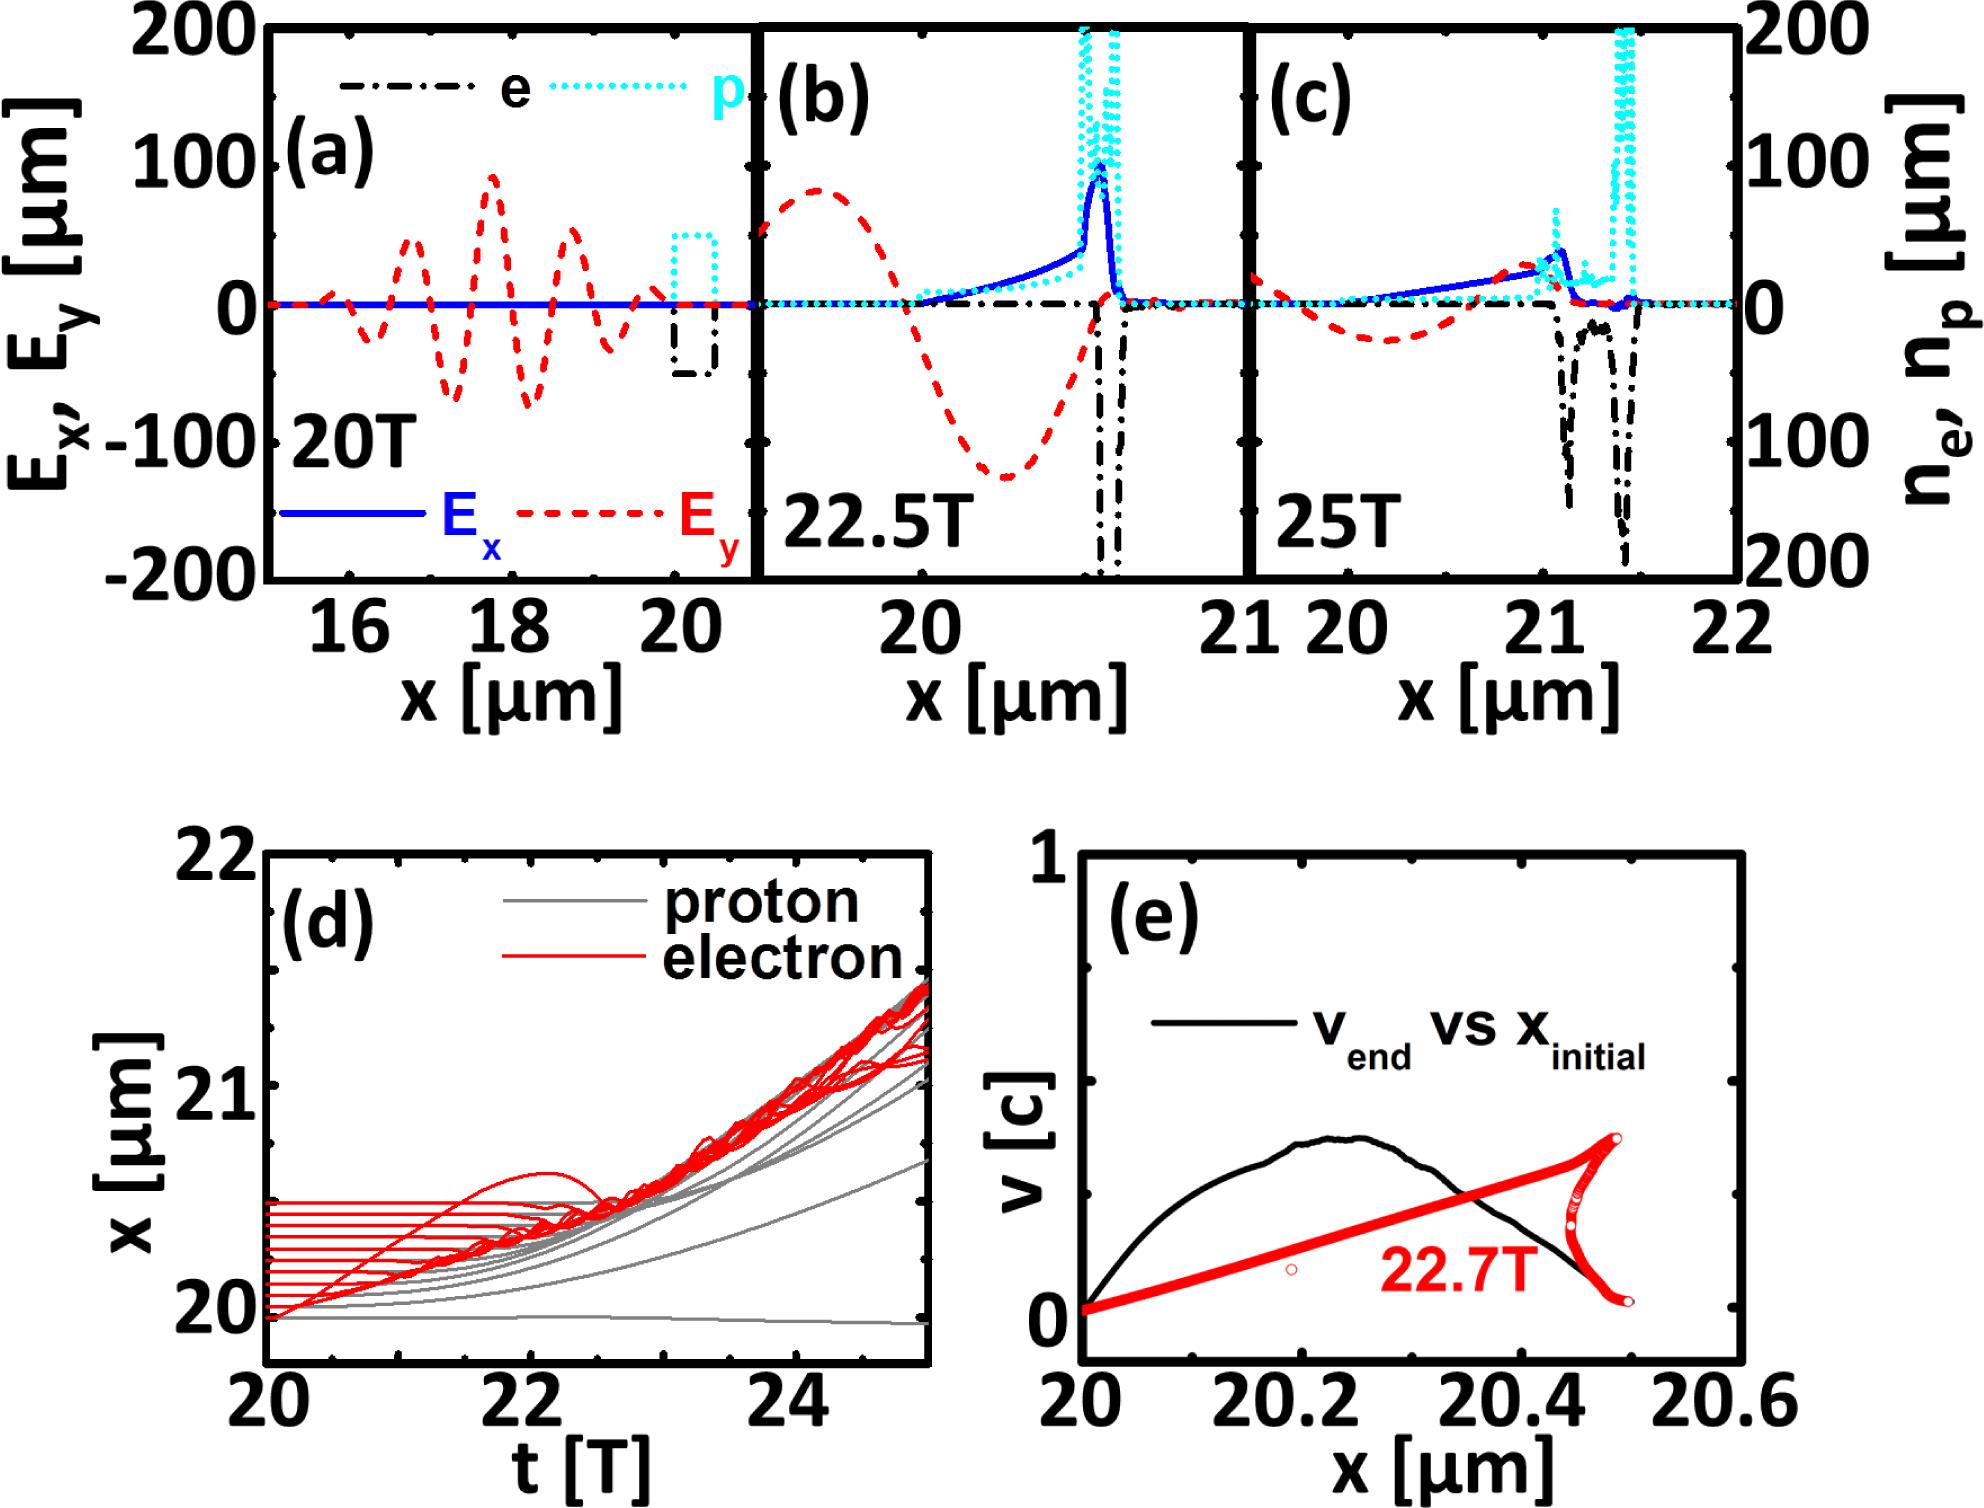 Electric field $E_{x}$ (blue solid line) and $E_{y}$ (red dash line), electron density (black dash–dot line), proton density (cyan dot line) at (a) $t=20T$, (b) $t=22.5T$ and (c) $t=25T$. (d) Trajectories of electrons (red solid line) and protons (gray solid line) in the simulations. (e) Phase space distributions of protons at $t=22.7T$ (red circles). The black solid line represents the velocity distribution at the end of the HB stage for protons initially at different positions of the foil ($v_{\text{end}}$ versus $x_{\text{initial}}$).